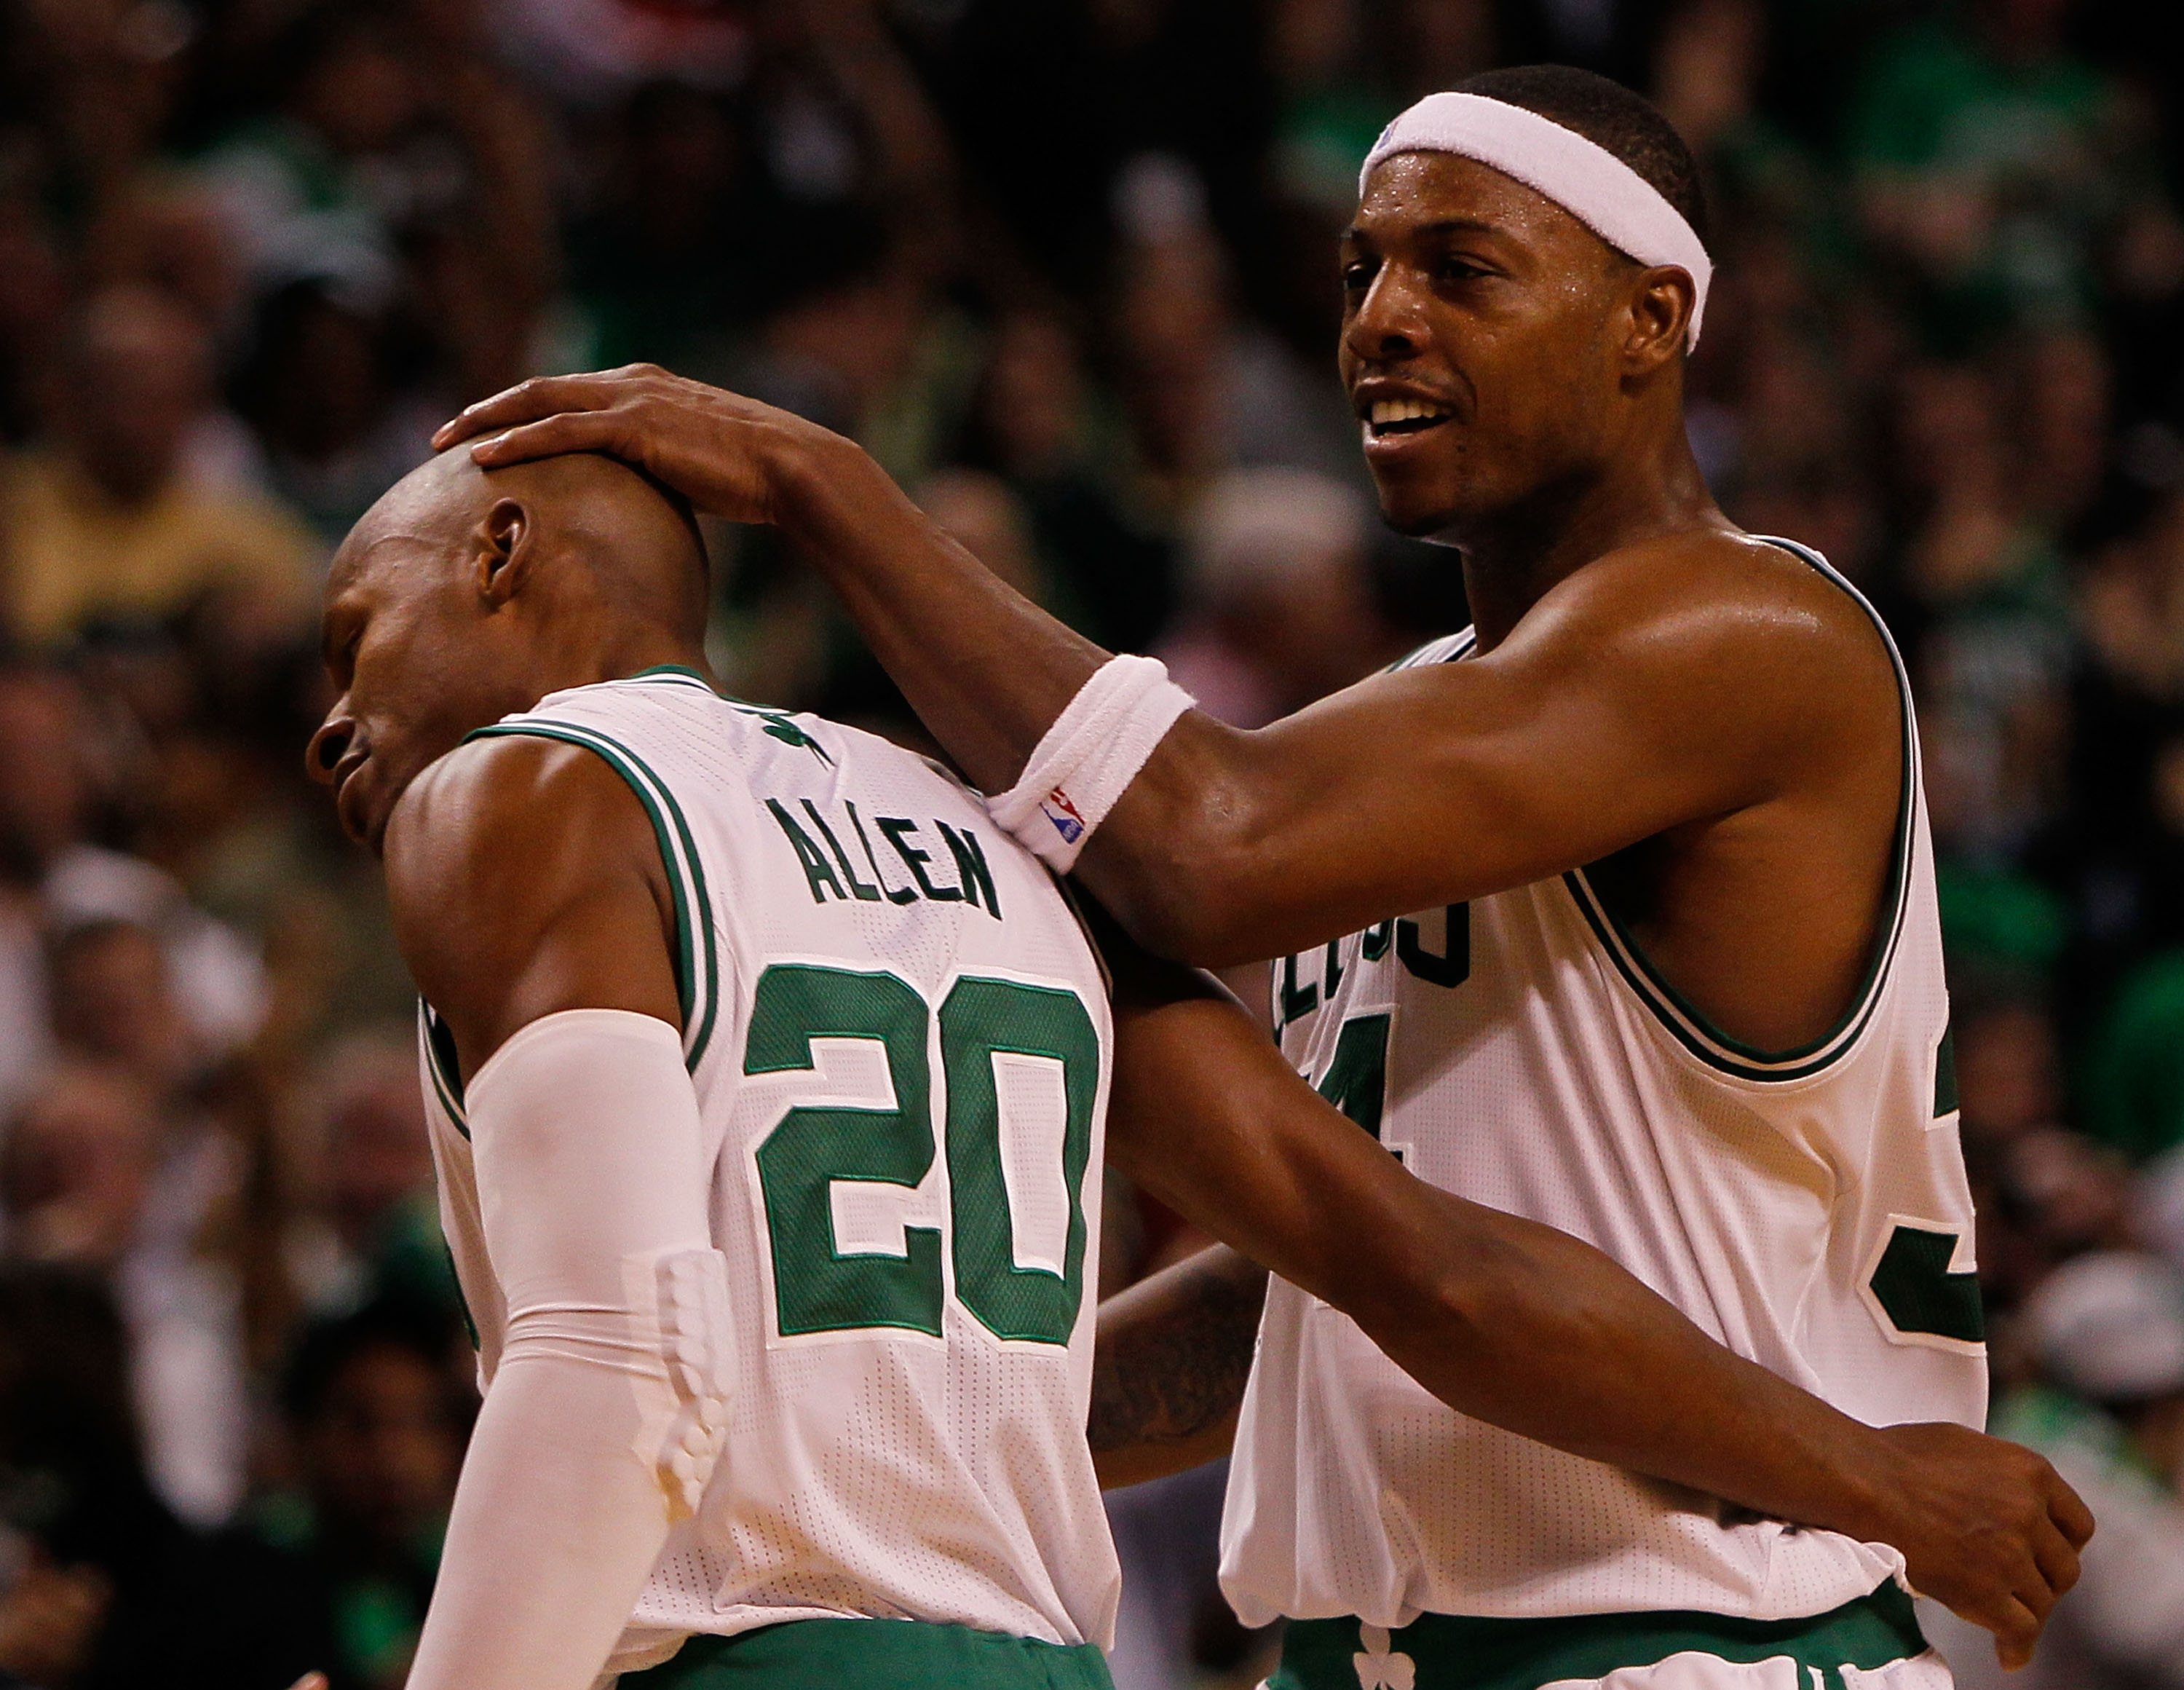 BOSTON, MA - OCTOBER 26:  Ray Allen #20 of the Boston Celtics celebrates his basket with teammate Paul Pierce #34 during a game against the Miami Heat at the TD Banknorth Garden on October 26, 2010 in Boston, Massachusetts. NOTE TO USER: User expressly ac